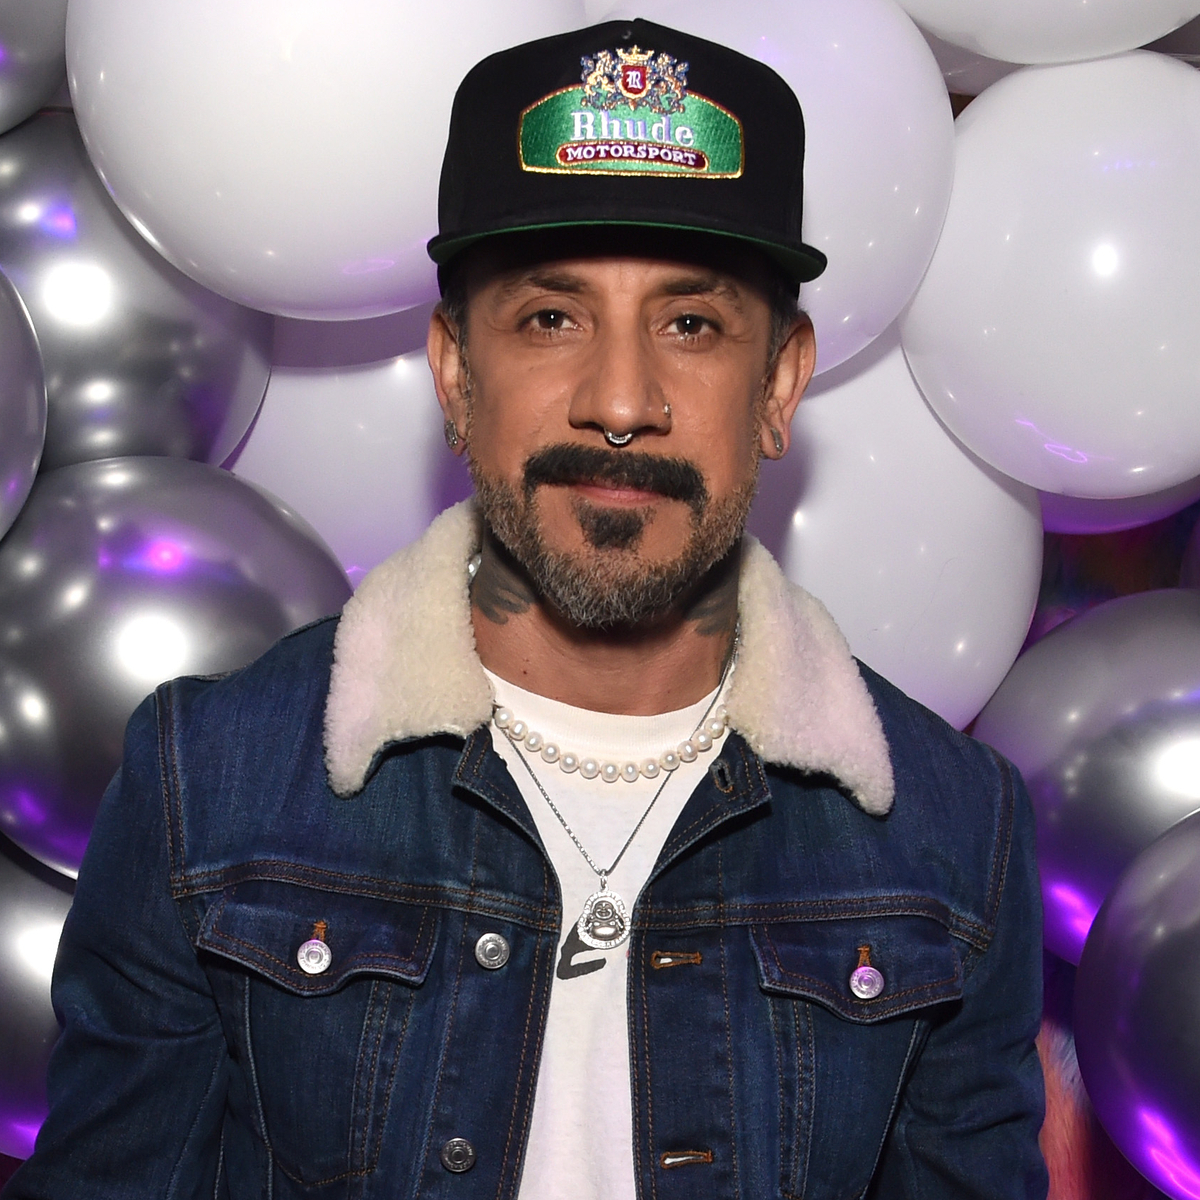 Why Backstreet Boys’ AJ McLean Separates His “Persona” From Real Self